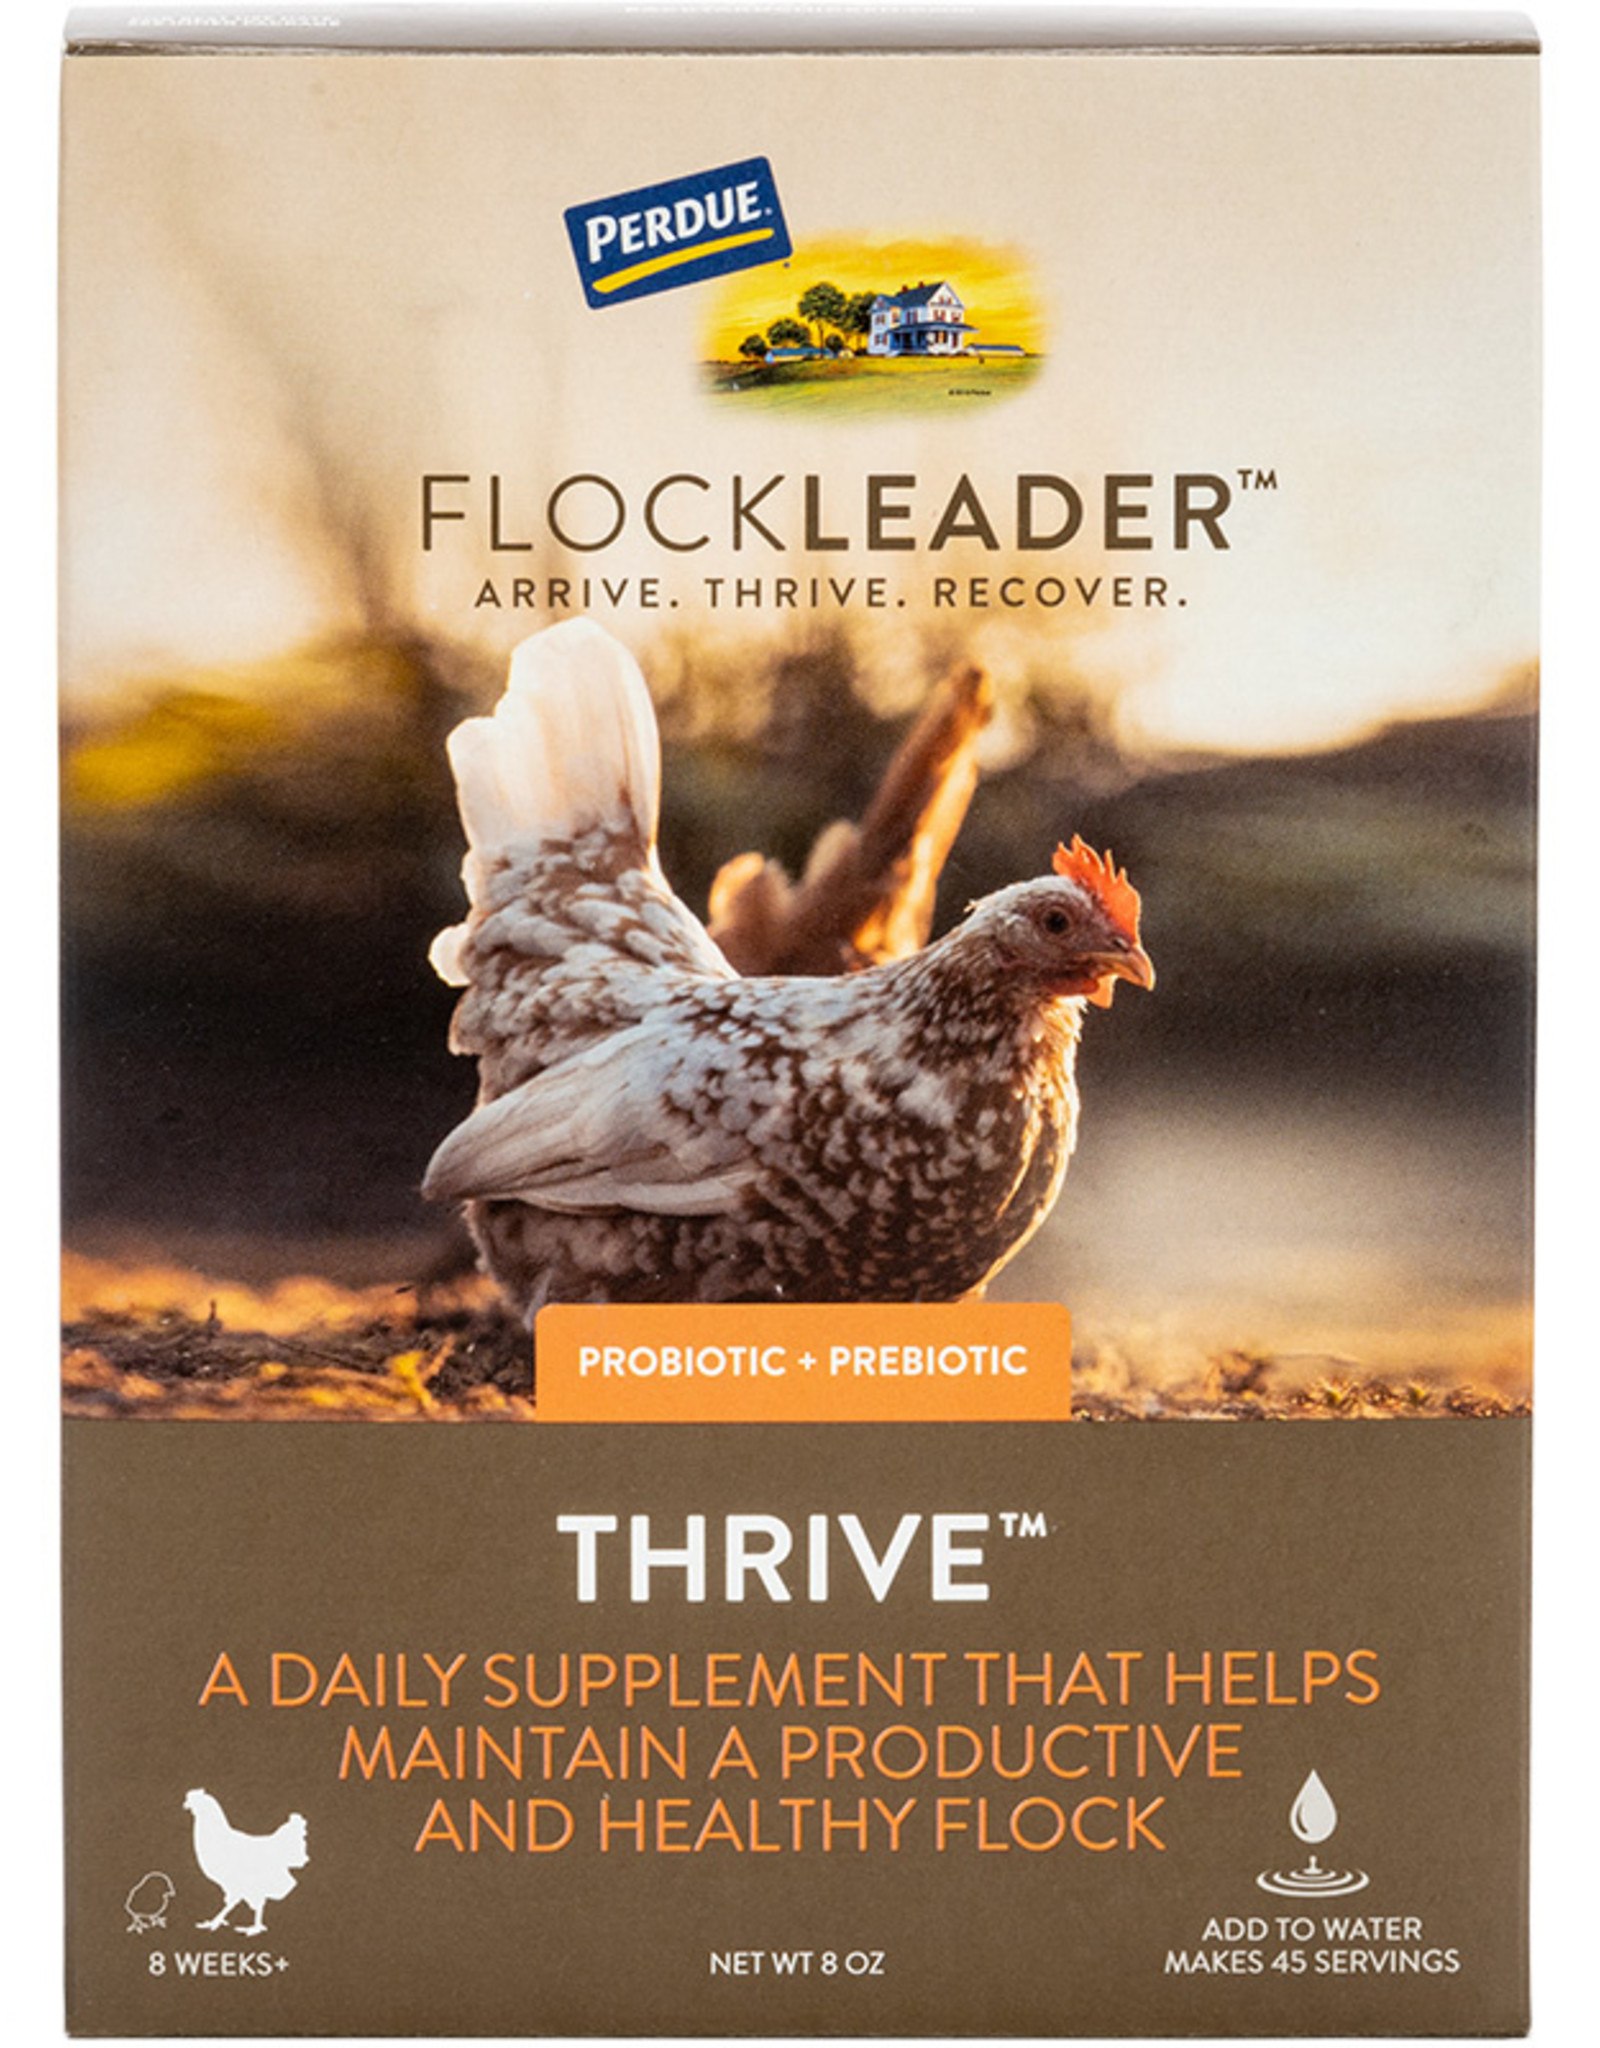 PERDUE PERDUE FLOCKLEADER THRIVE POULTRY SUPPLEMENT